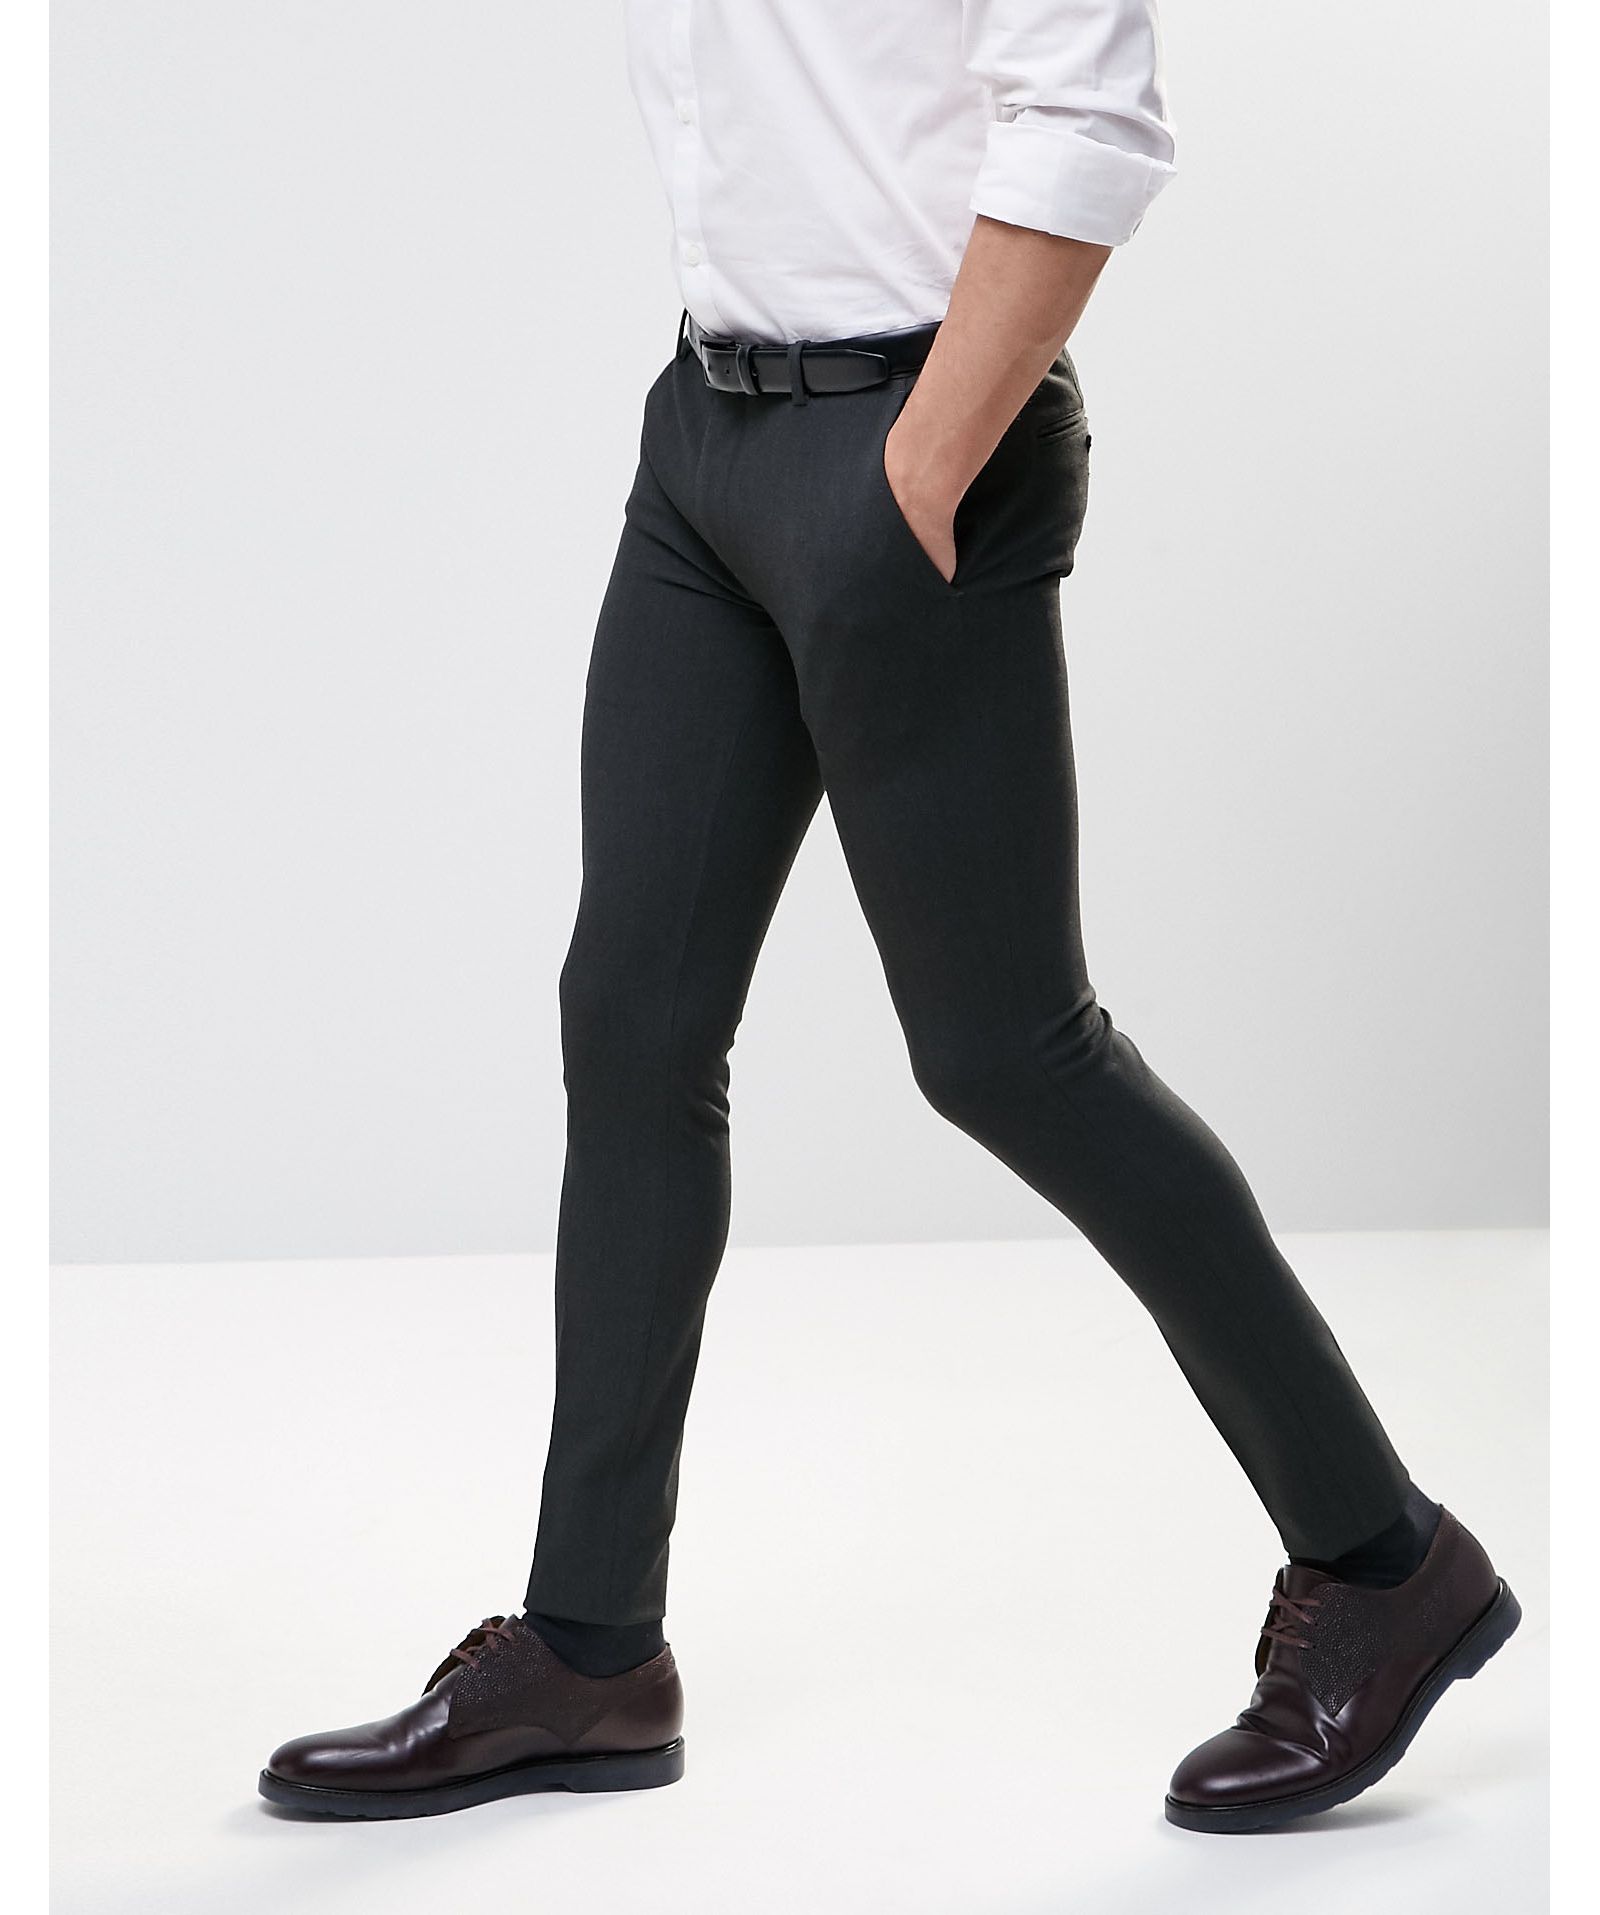 ASOS Extreme Super Skinny Smart Trousers in Charcoal